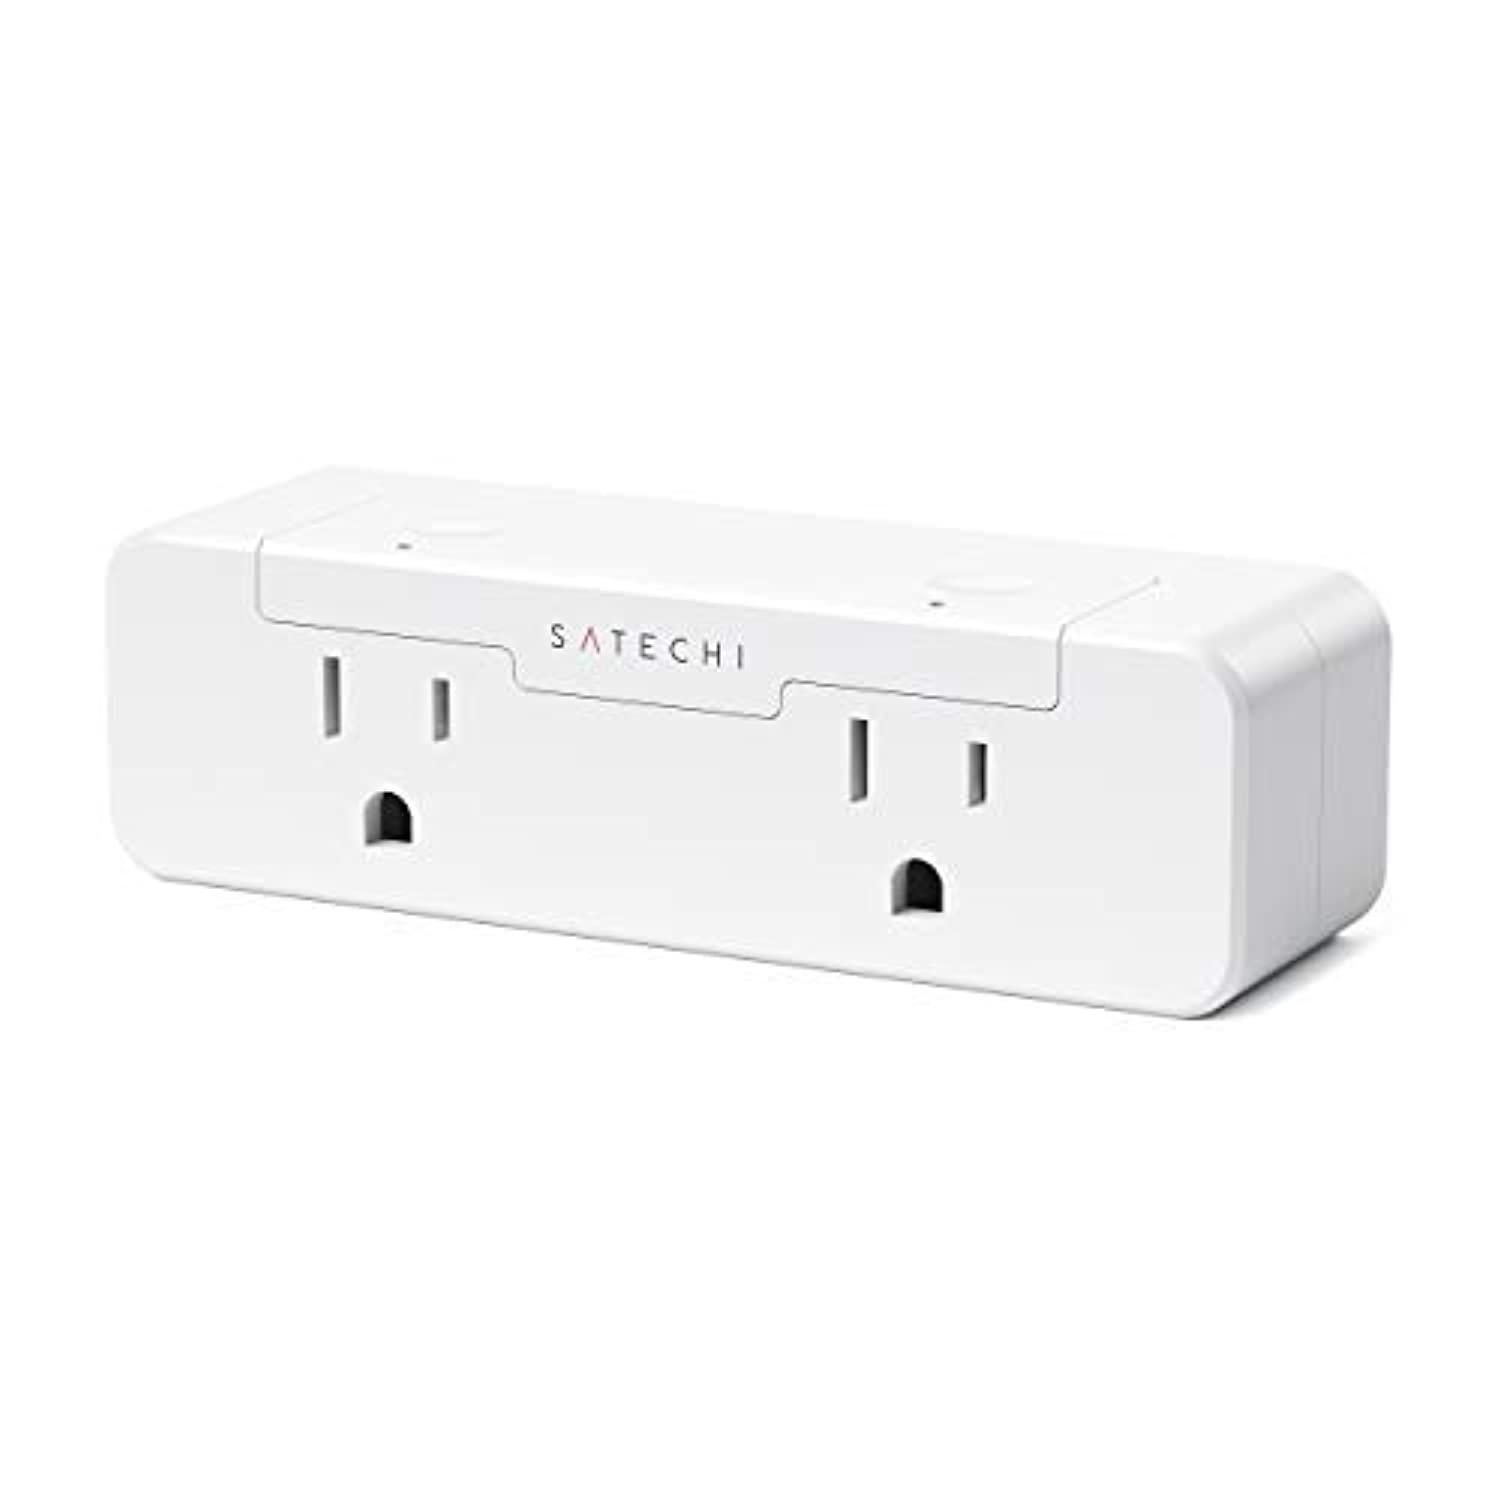 satechi dual smart outlet with real-time power monitoring - wi-fi smart plug 2.4ghz enabled - works with apple homekit (usa, 